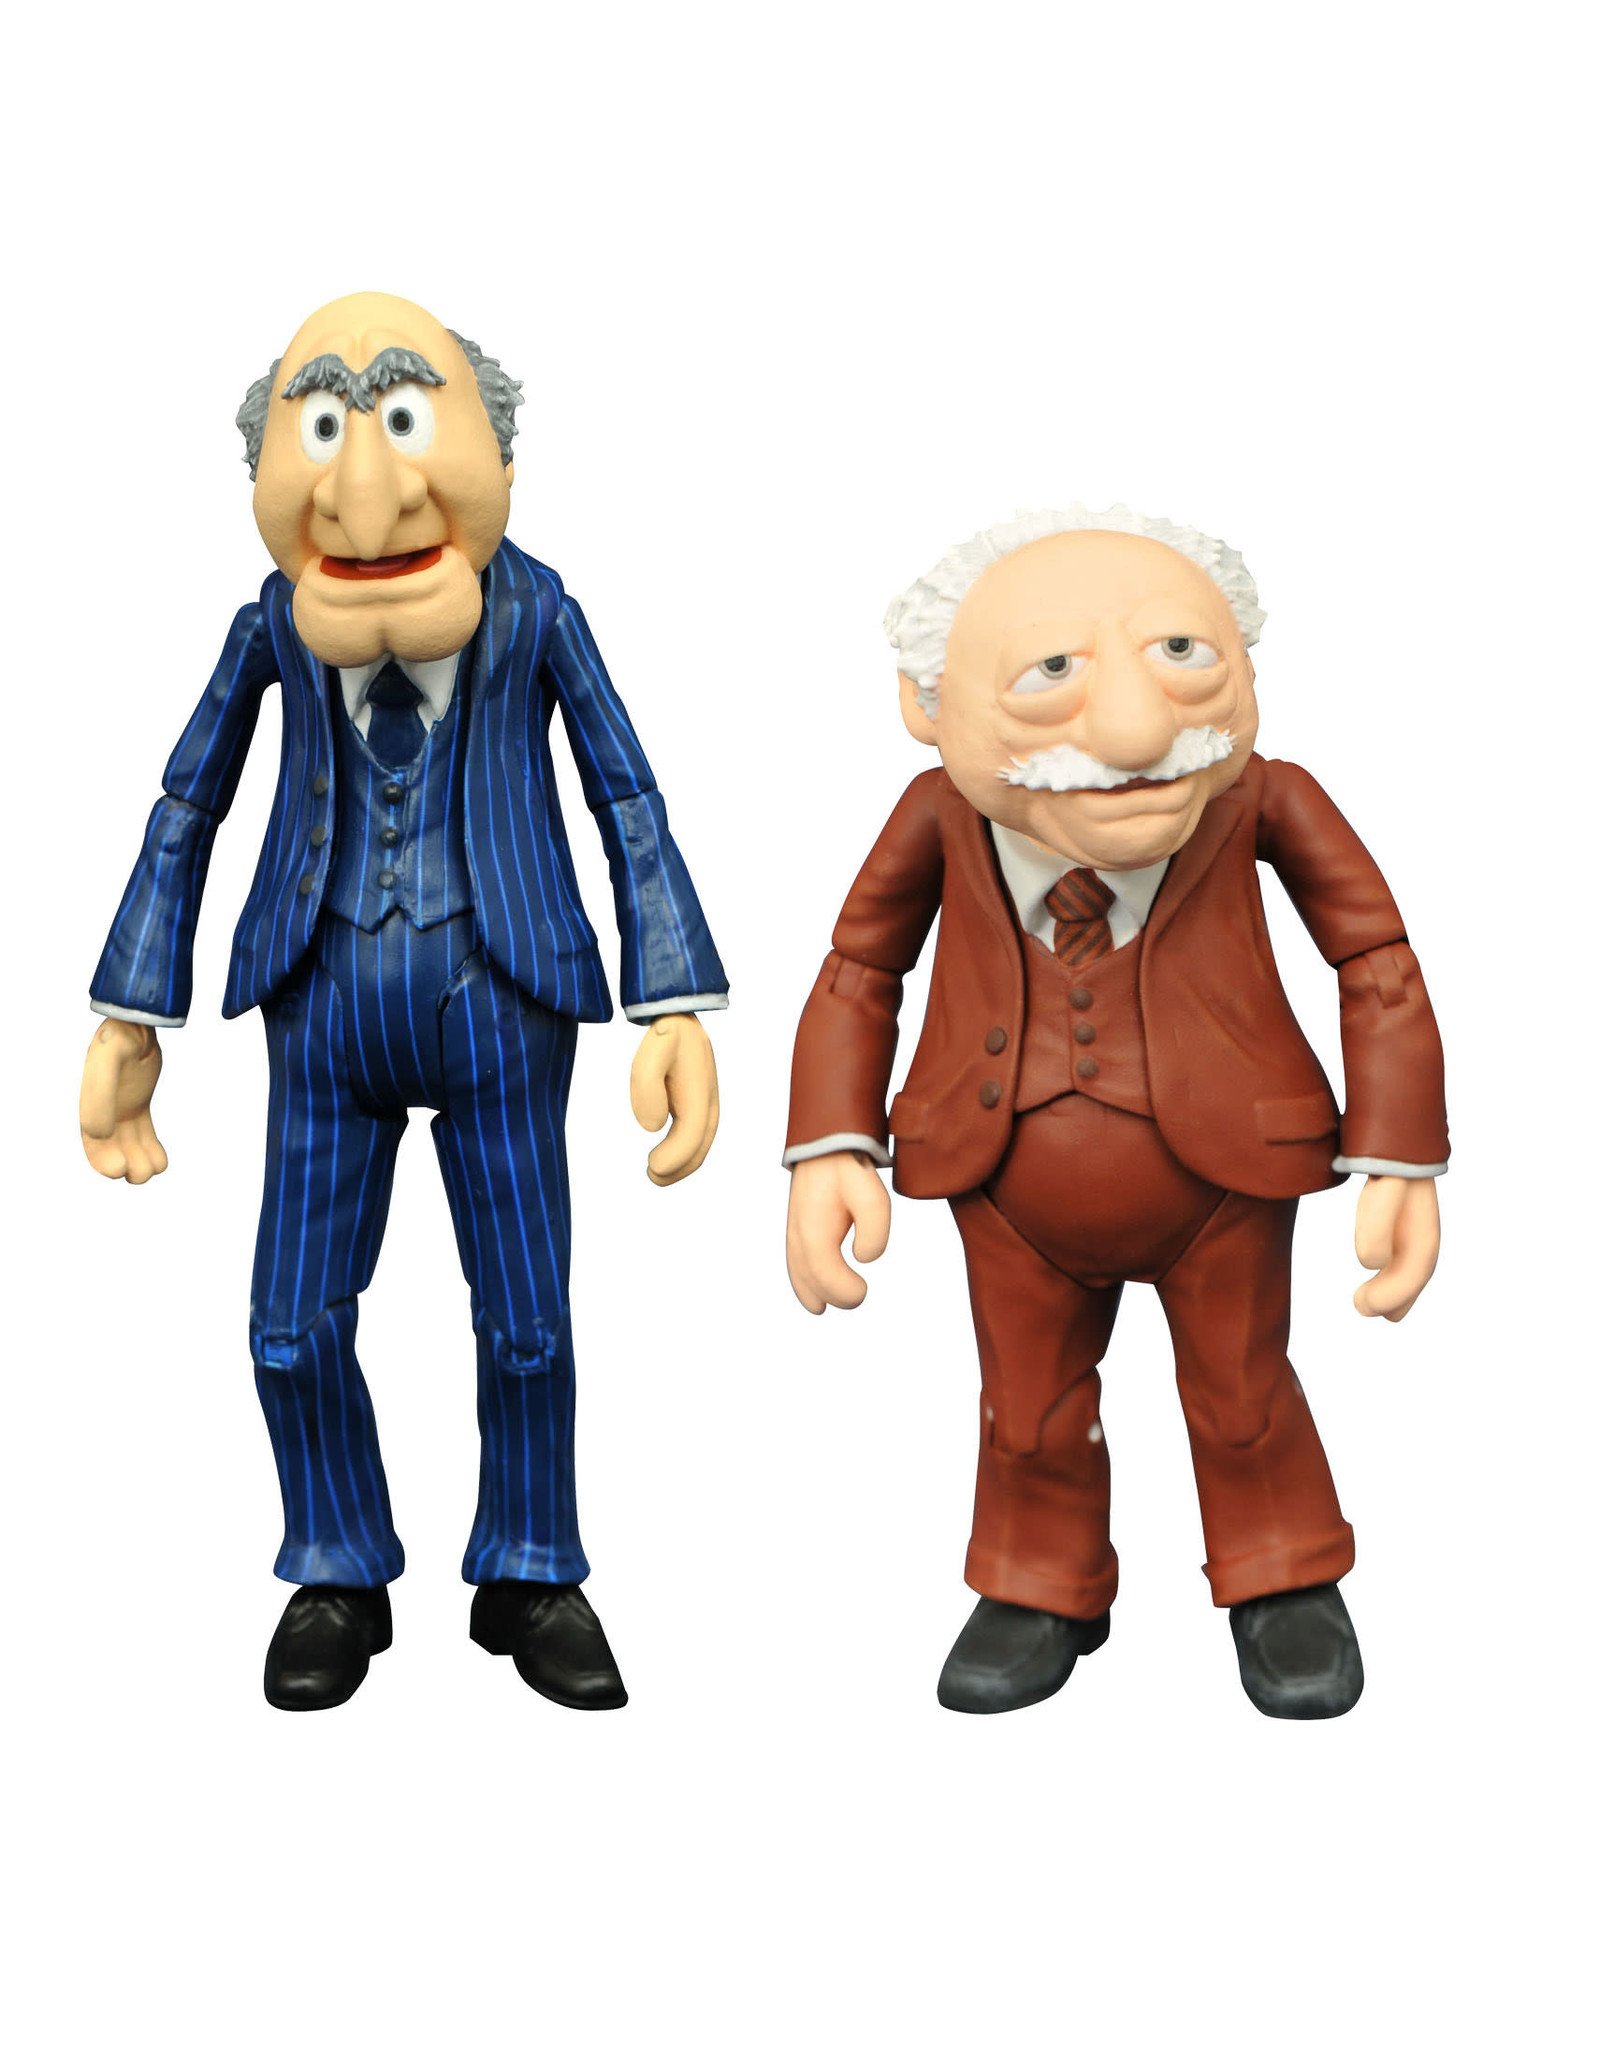 Muppets Best of Series 2 - Statler and Waldorf Action Figure Set